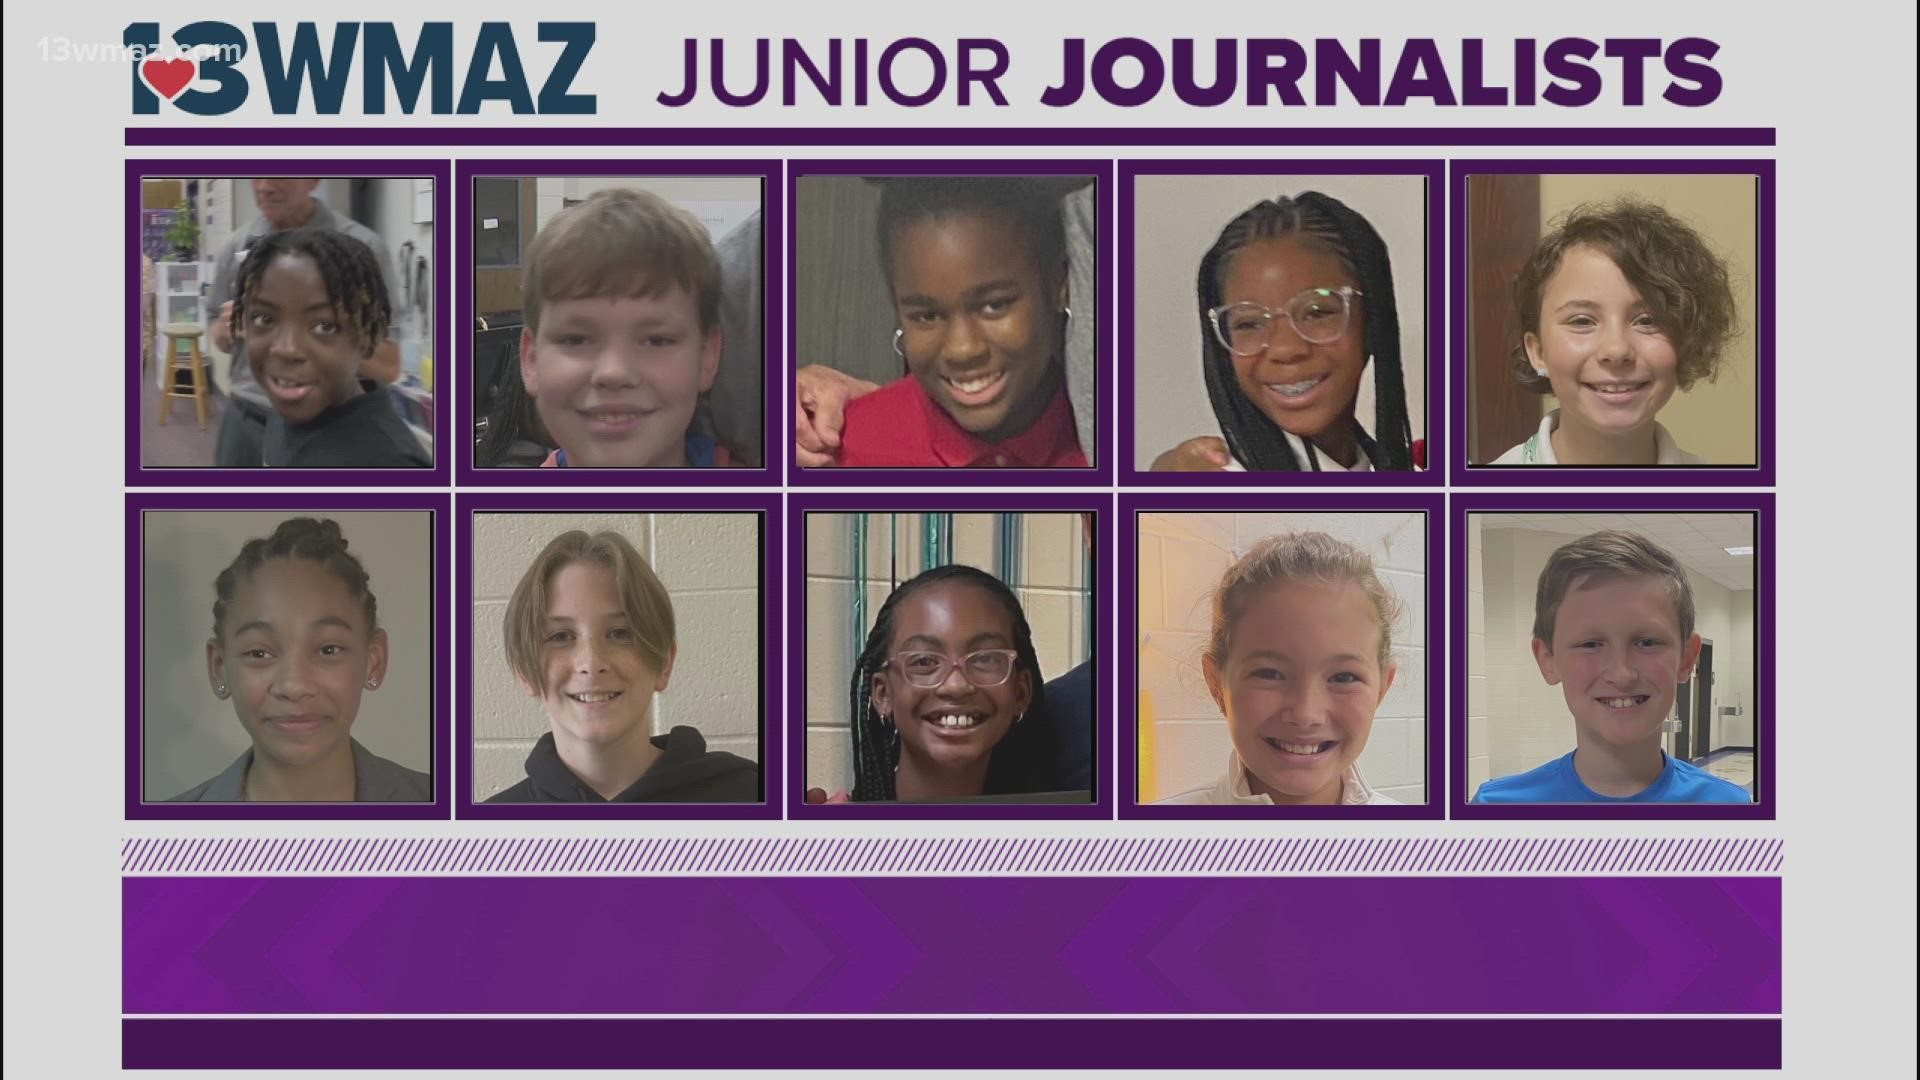 All ten Junior Journalists have now been surprised. All we have to do now is just look for them on a TV near you